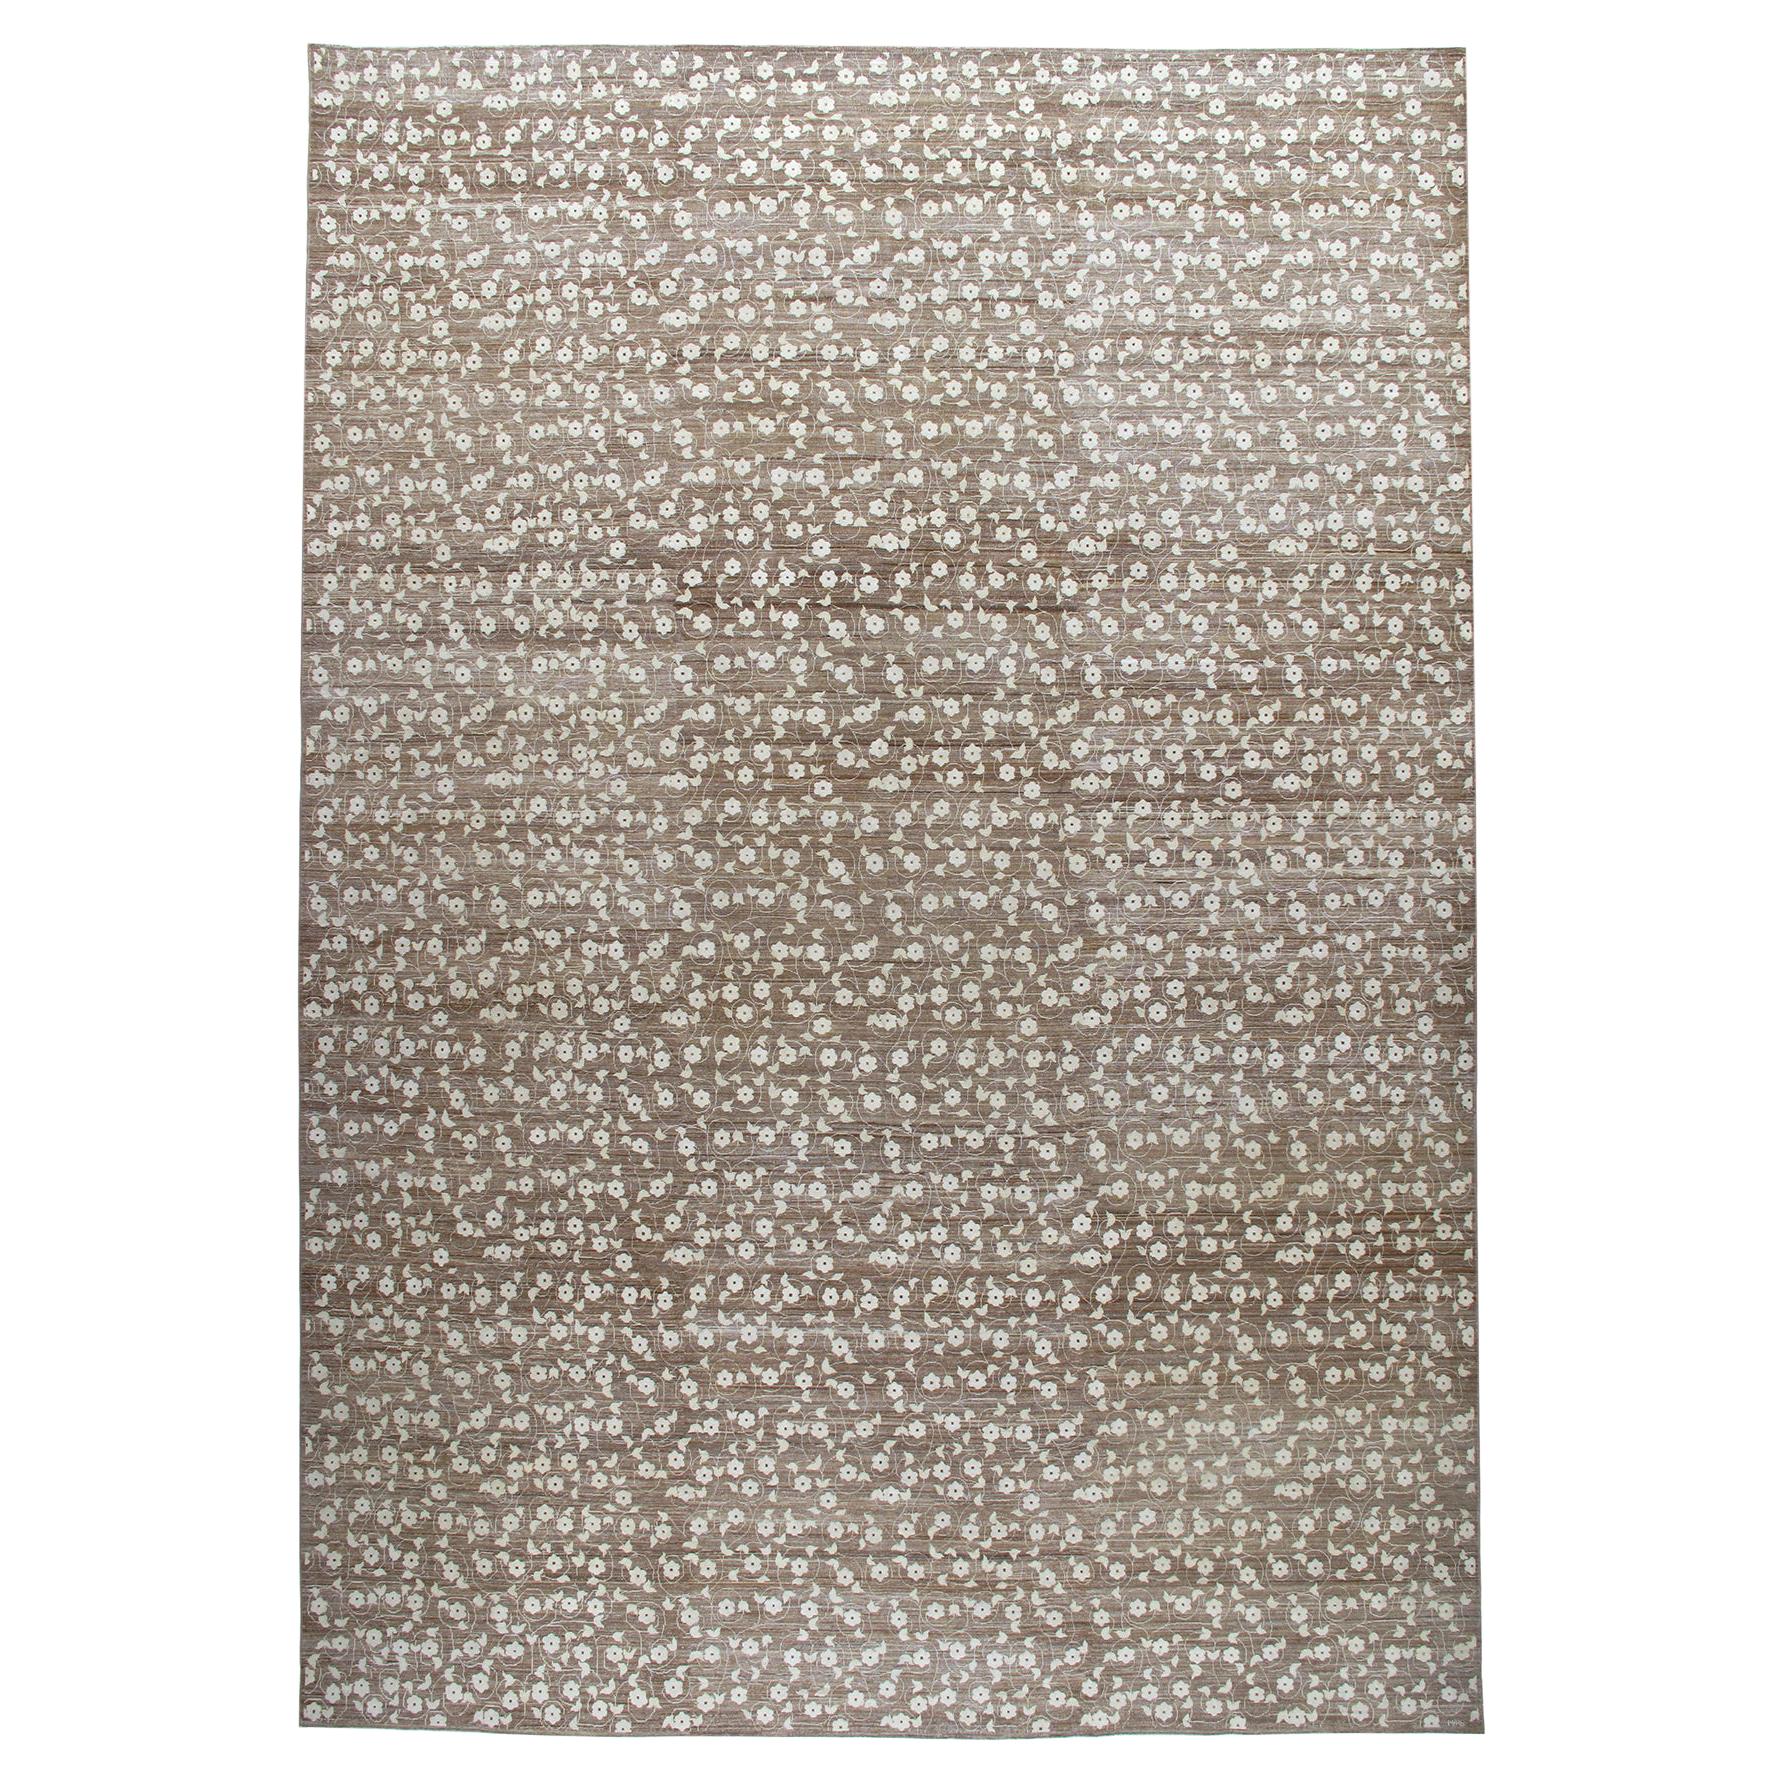 Contemporary Decorative Handknotted Rug with a Floral Design